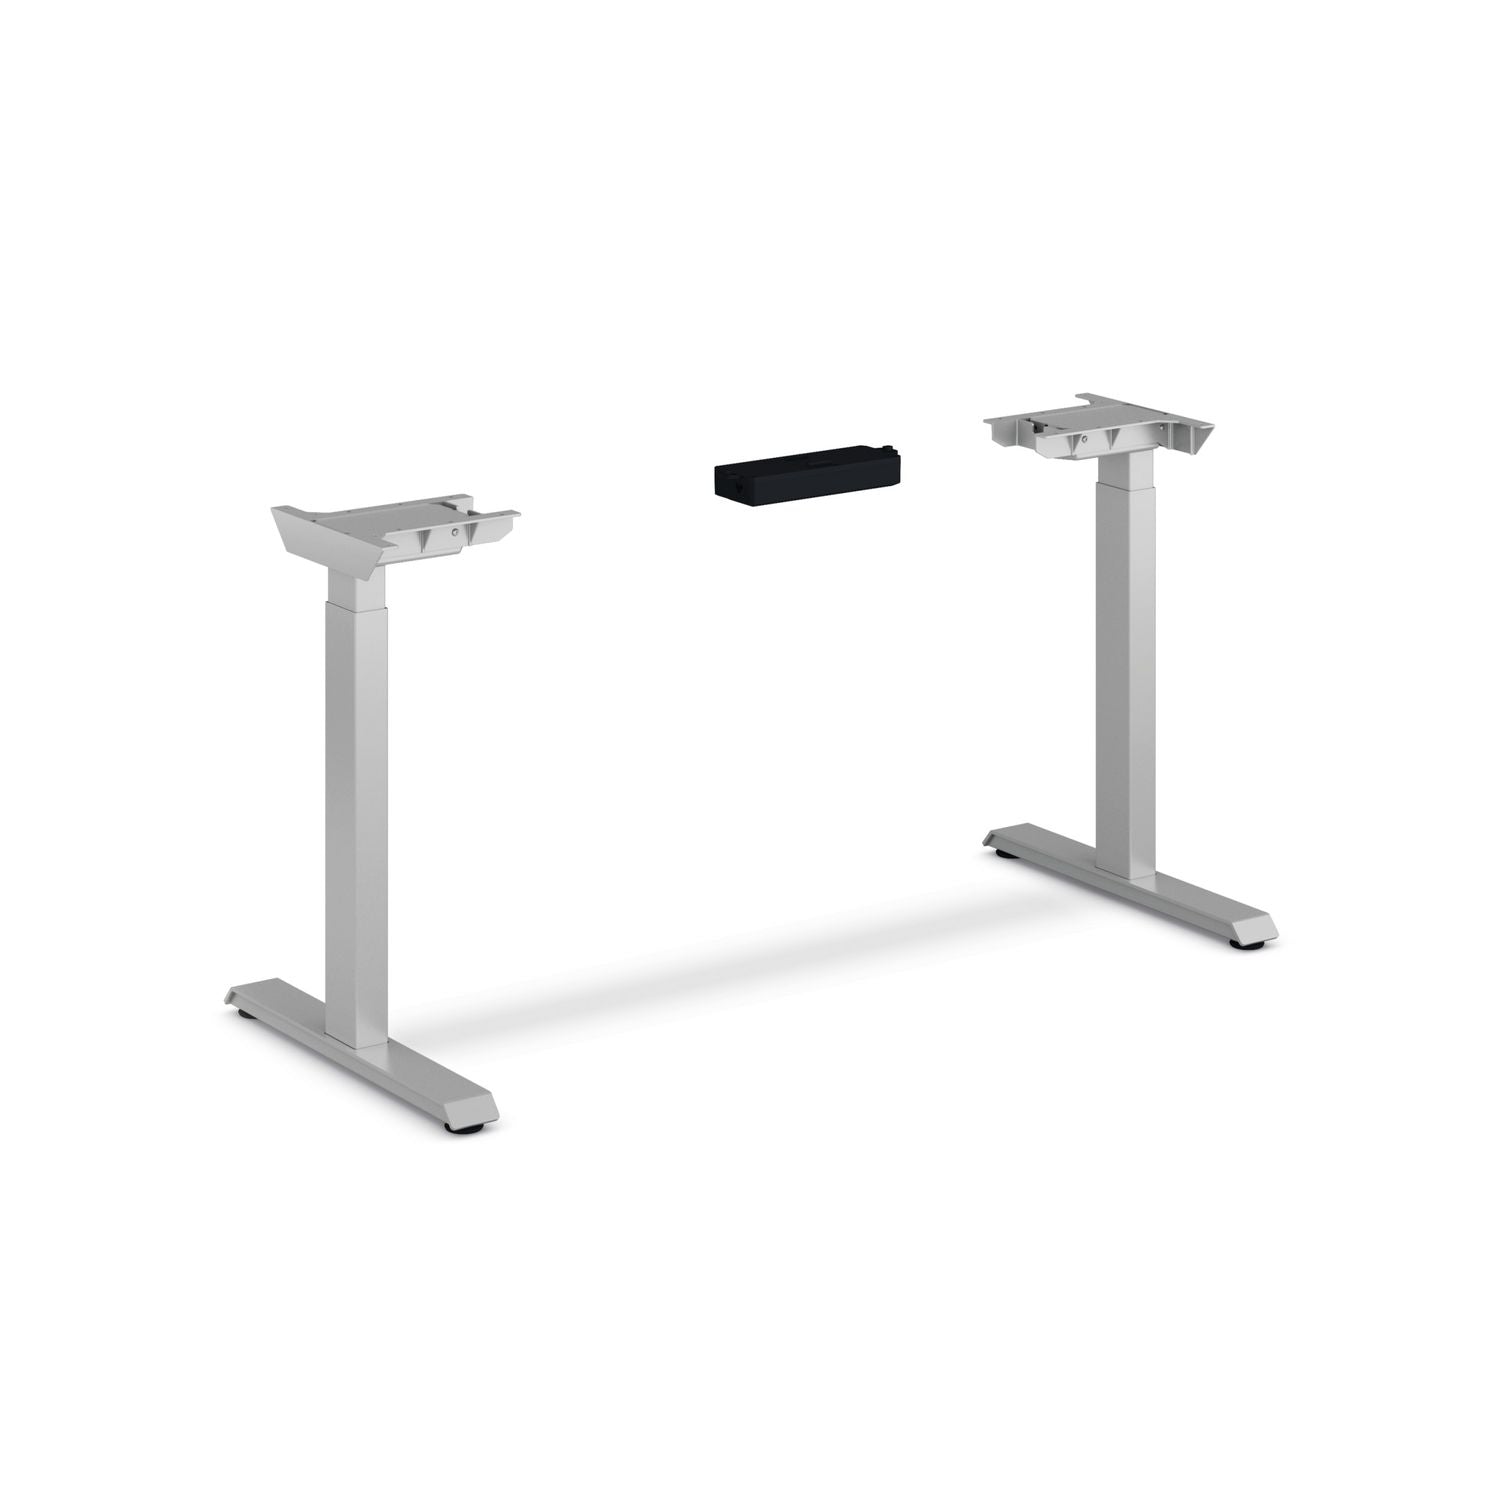 coordinate-height-adjustable-desk-bundle-2-stage-70-x-22-x-2775-to-47-silver-mesh\\silver-ships-in-7-10-business-days_honhat2smsv2270 - 3